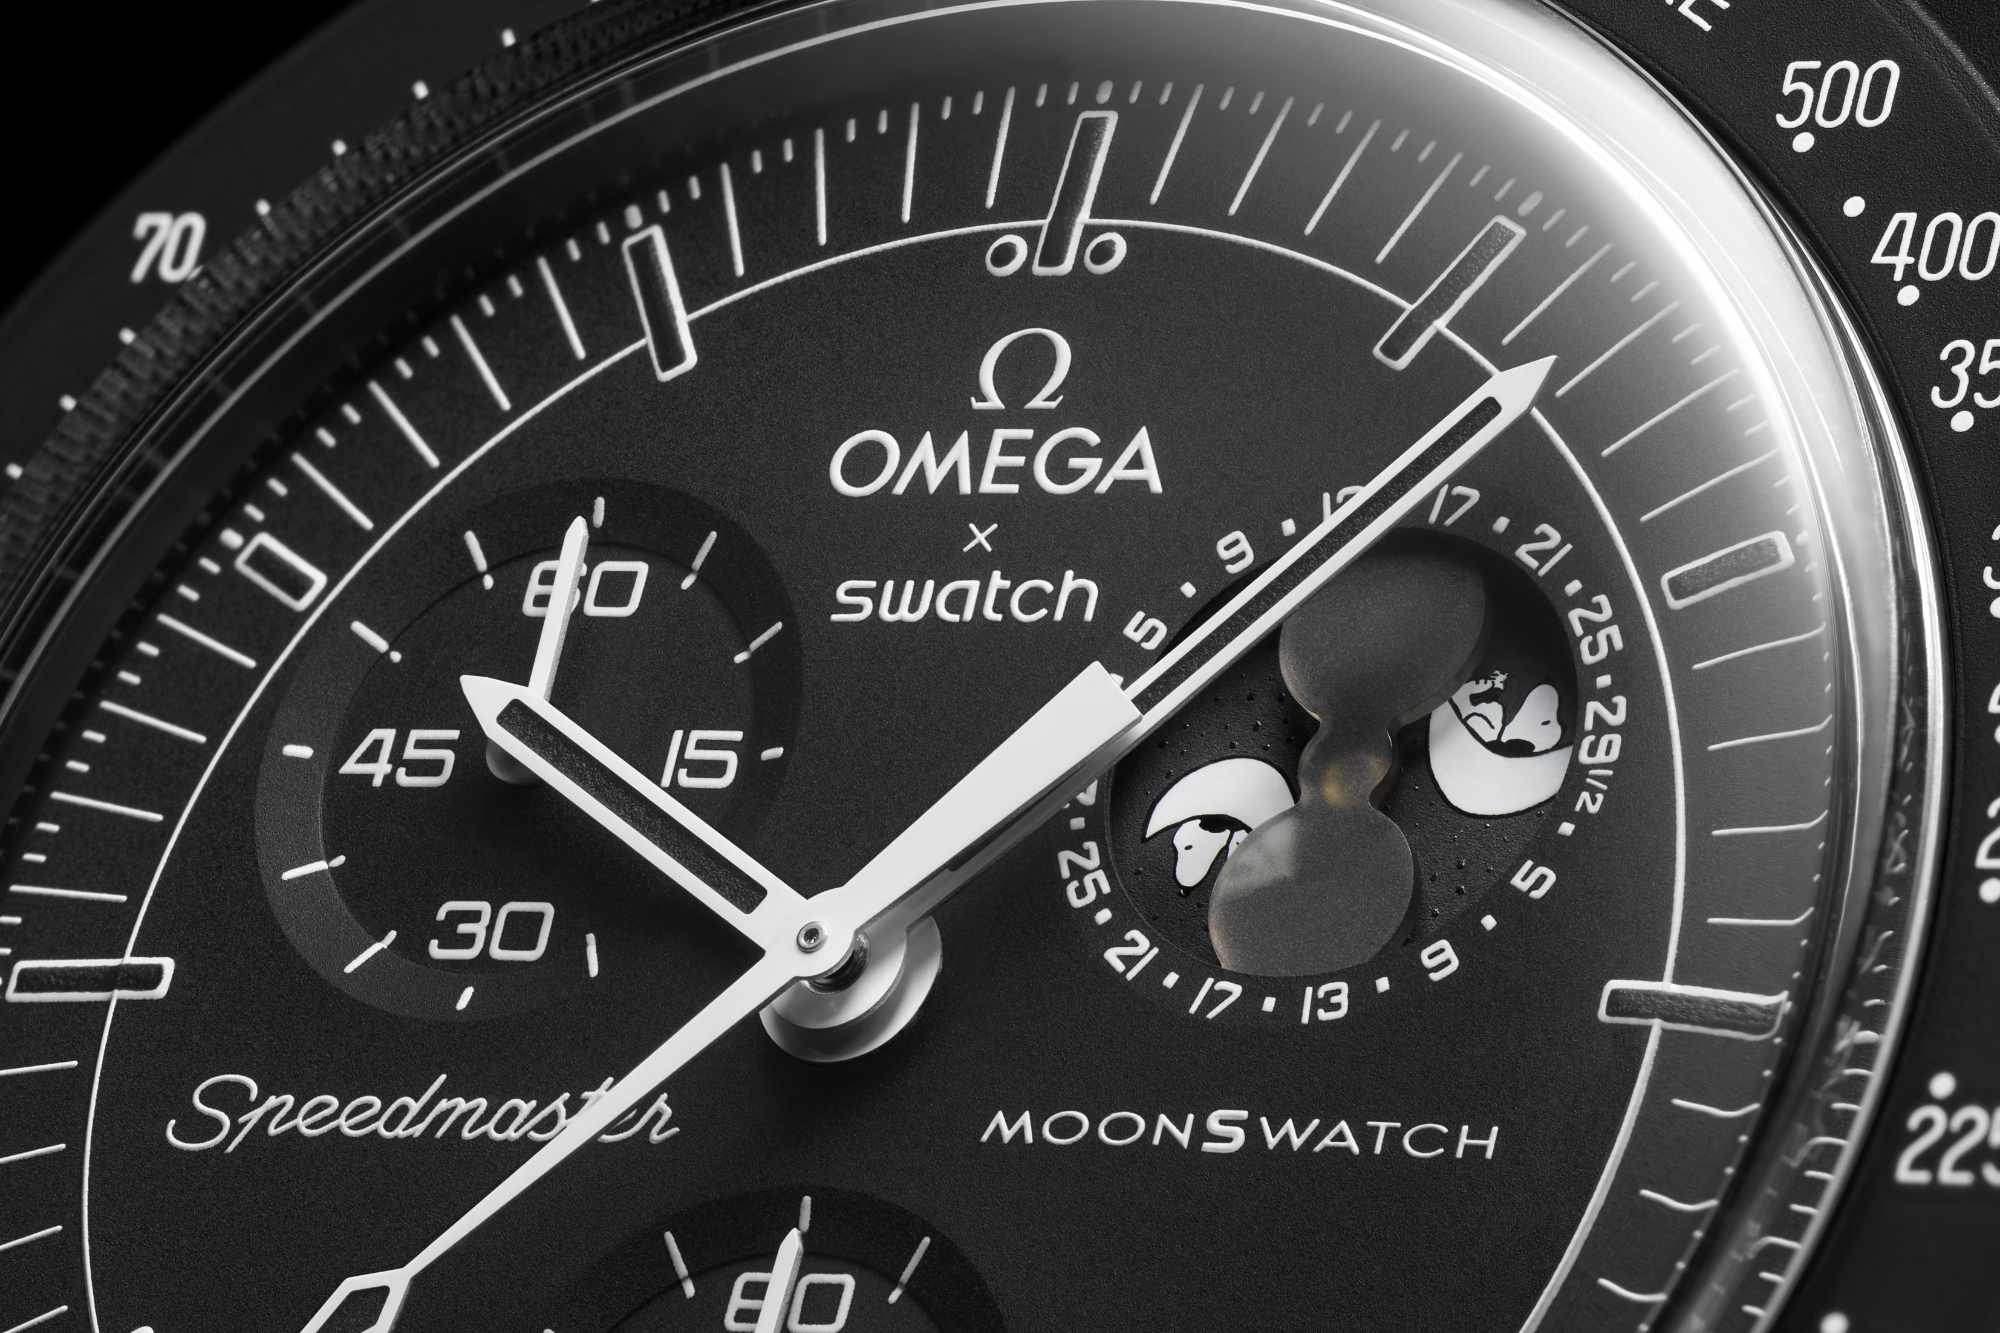 Snoopy's Black OMEGA & Swatch MoonSwatch Has a Release Date